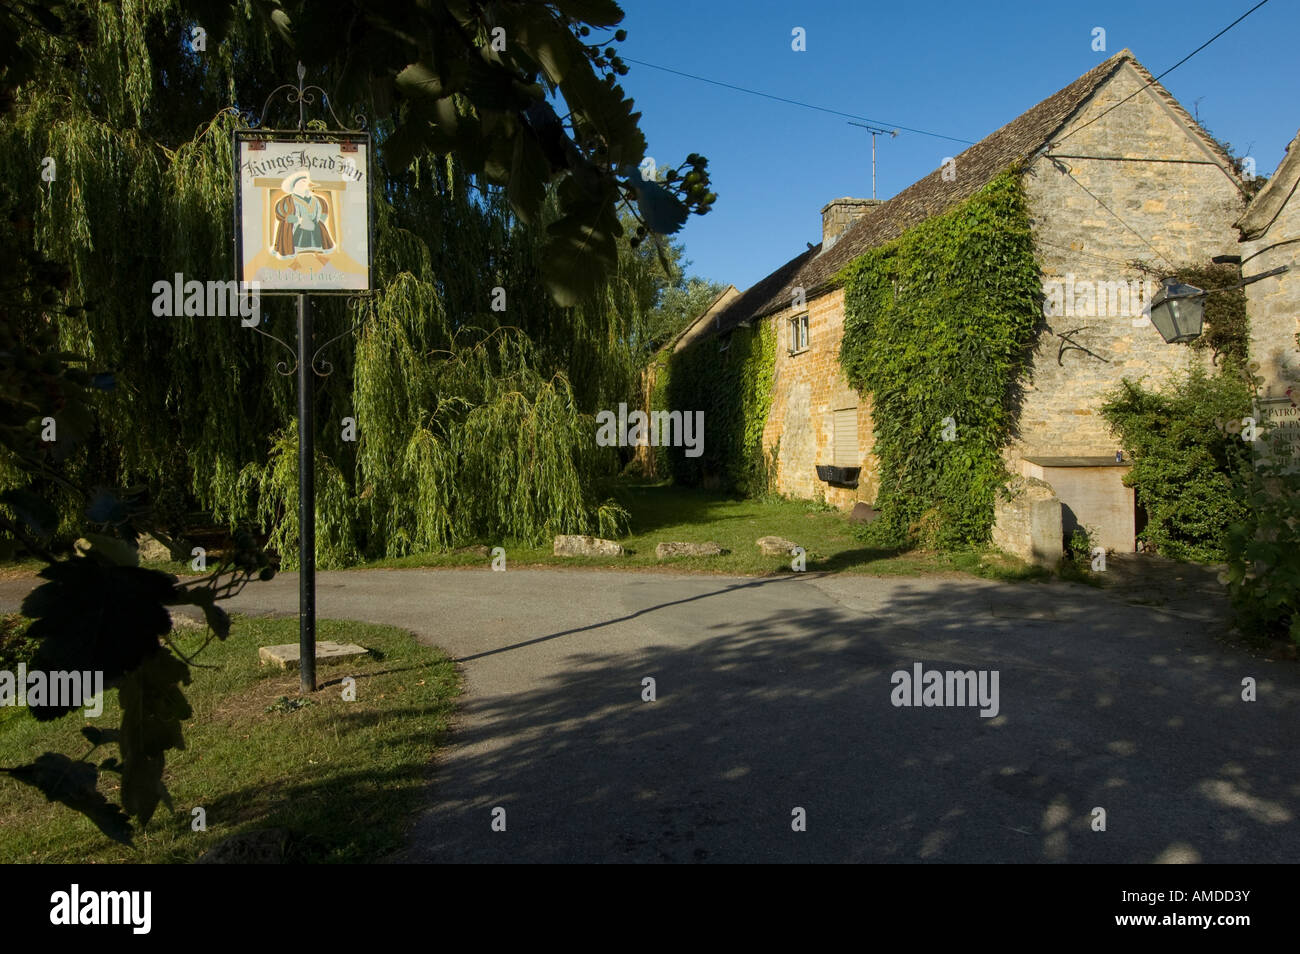 Kings Head Inn - typical English country pub and restaurant in 16th century building. Stock Photo